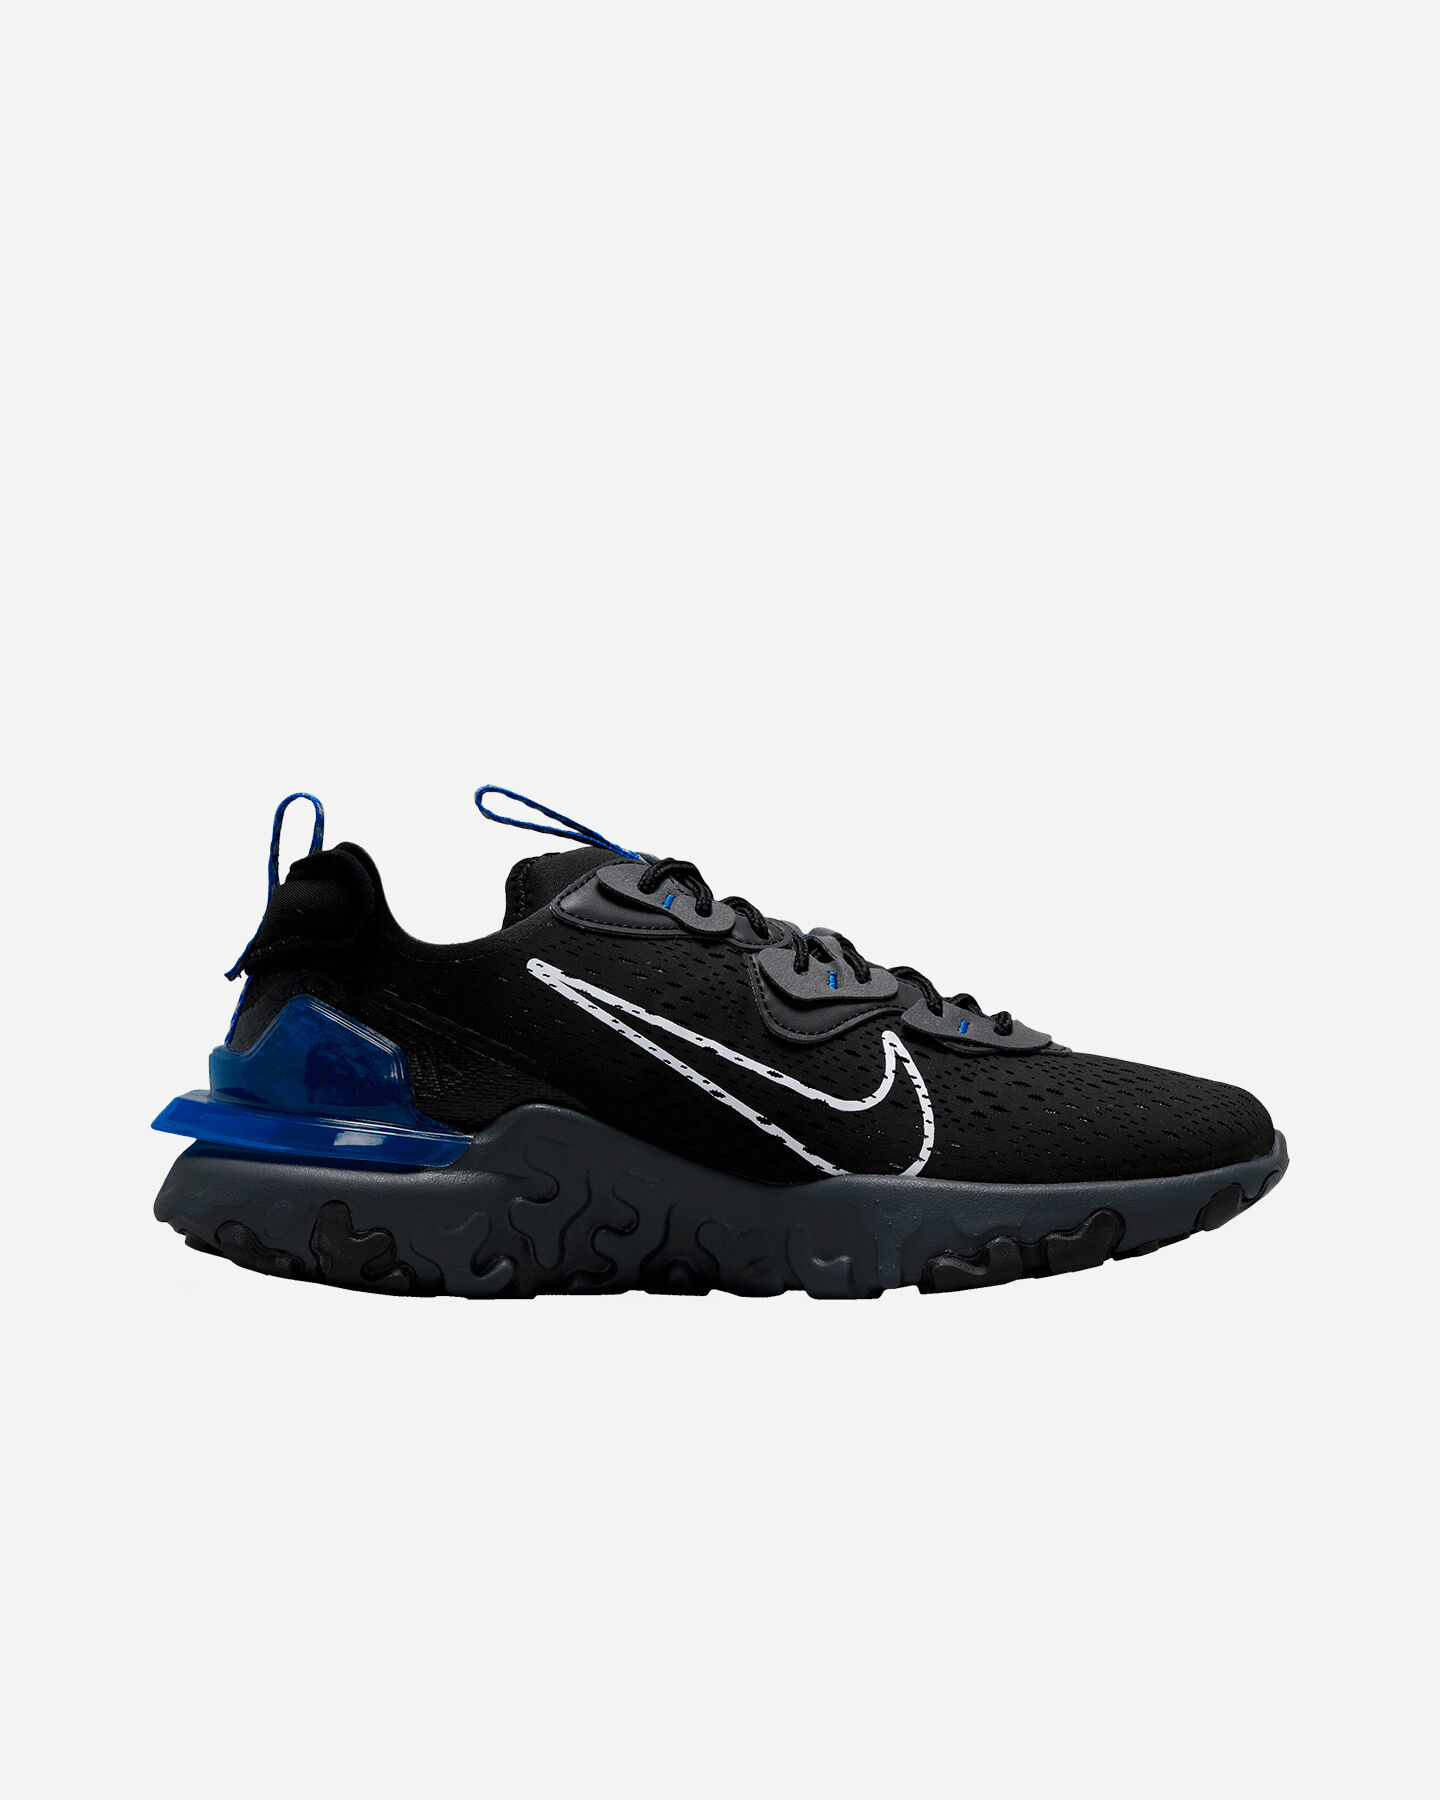  Scarpe sneakers NIKE REACT VISION M S5473900|001|6 scatto 0